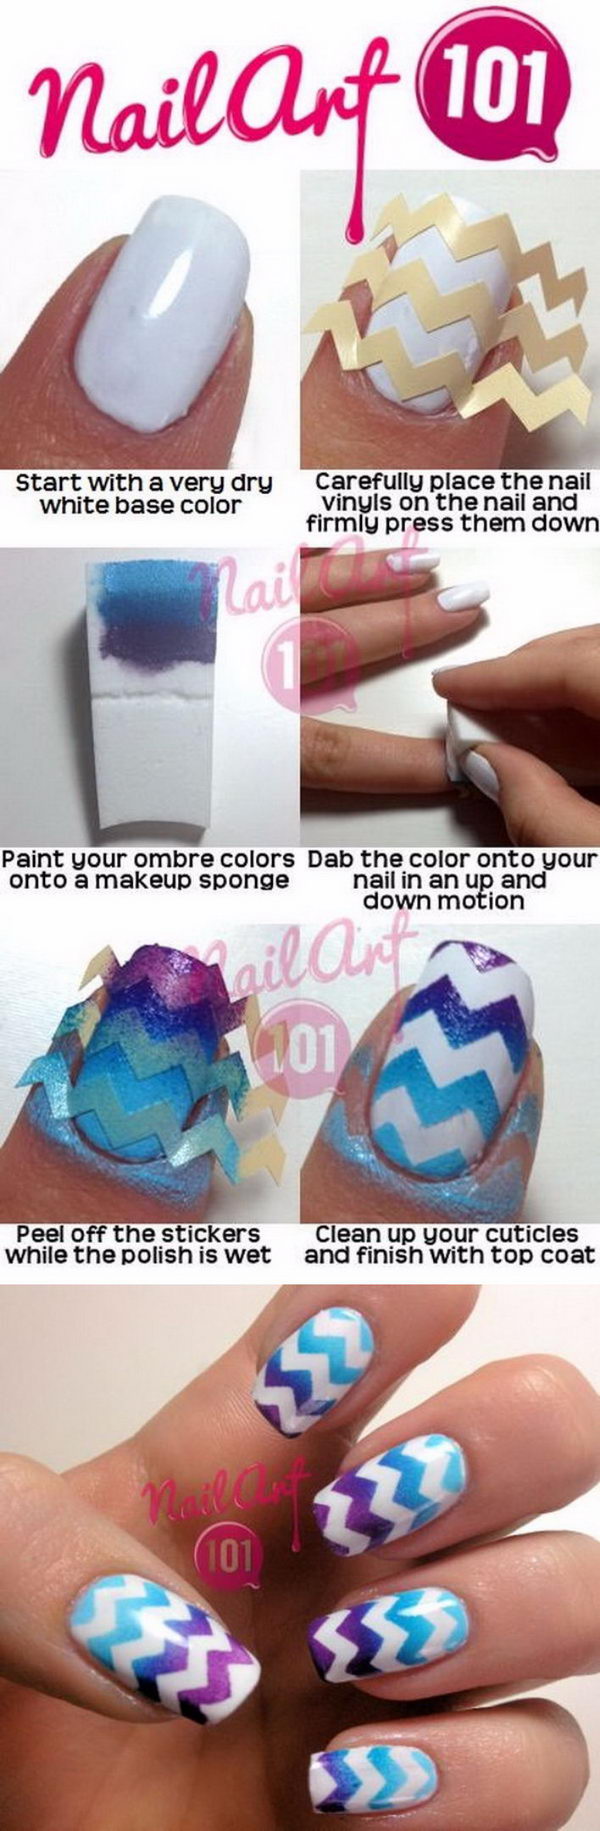 Cheveron Nail Art. This is such a easy and fun mani! Must try.